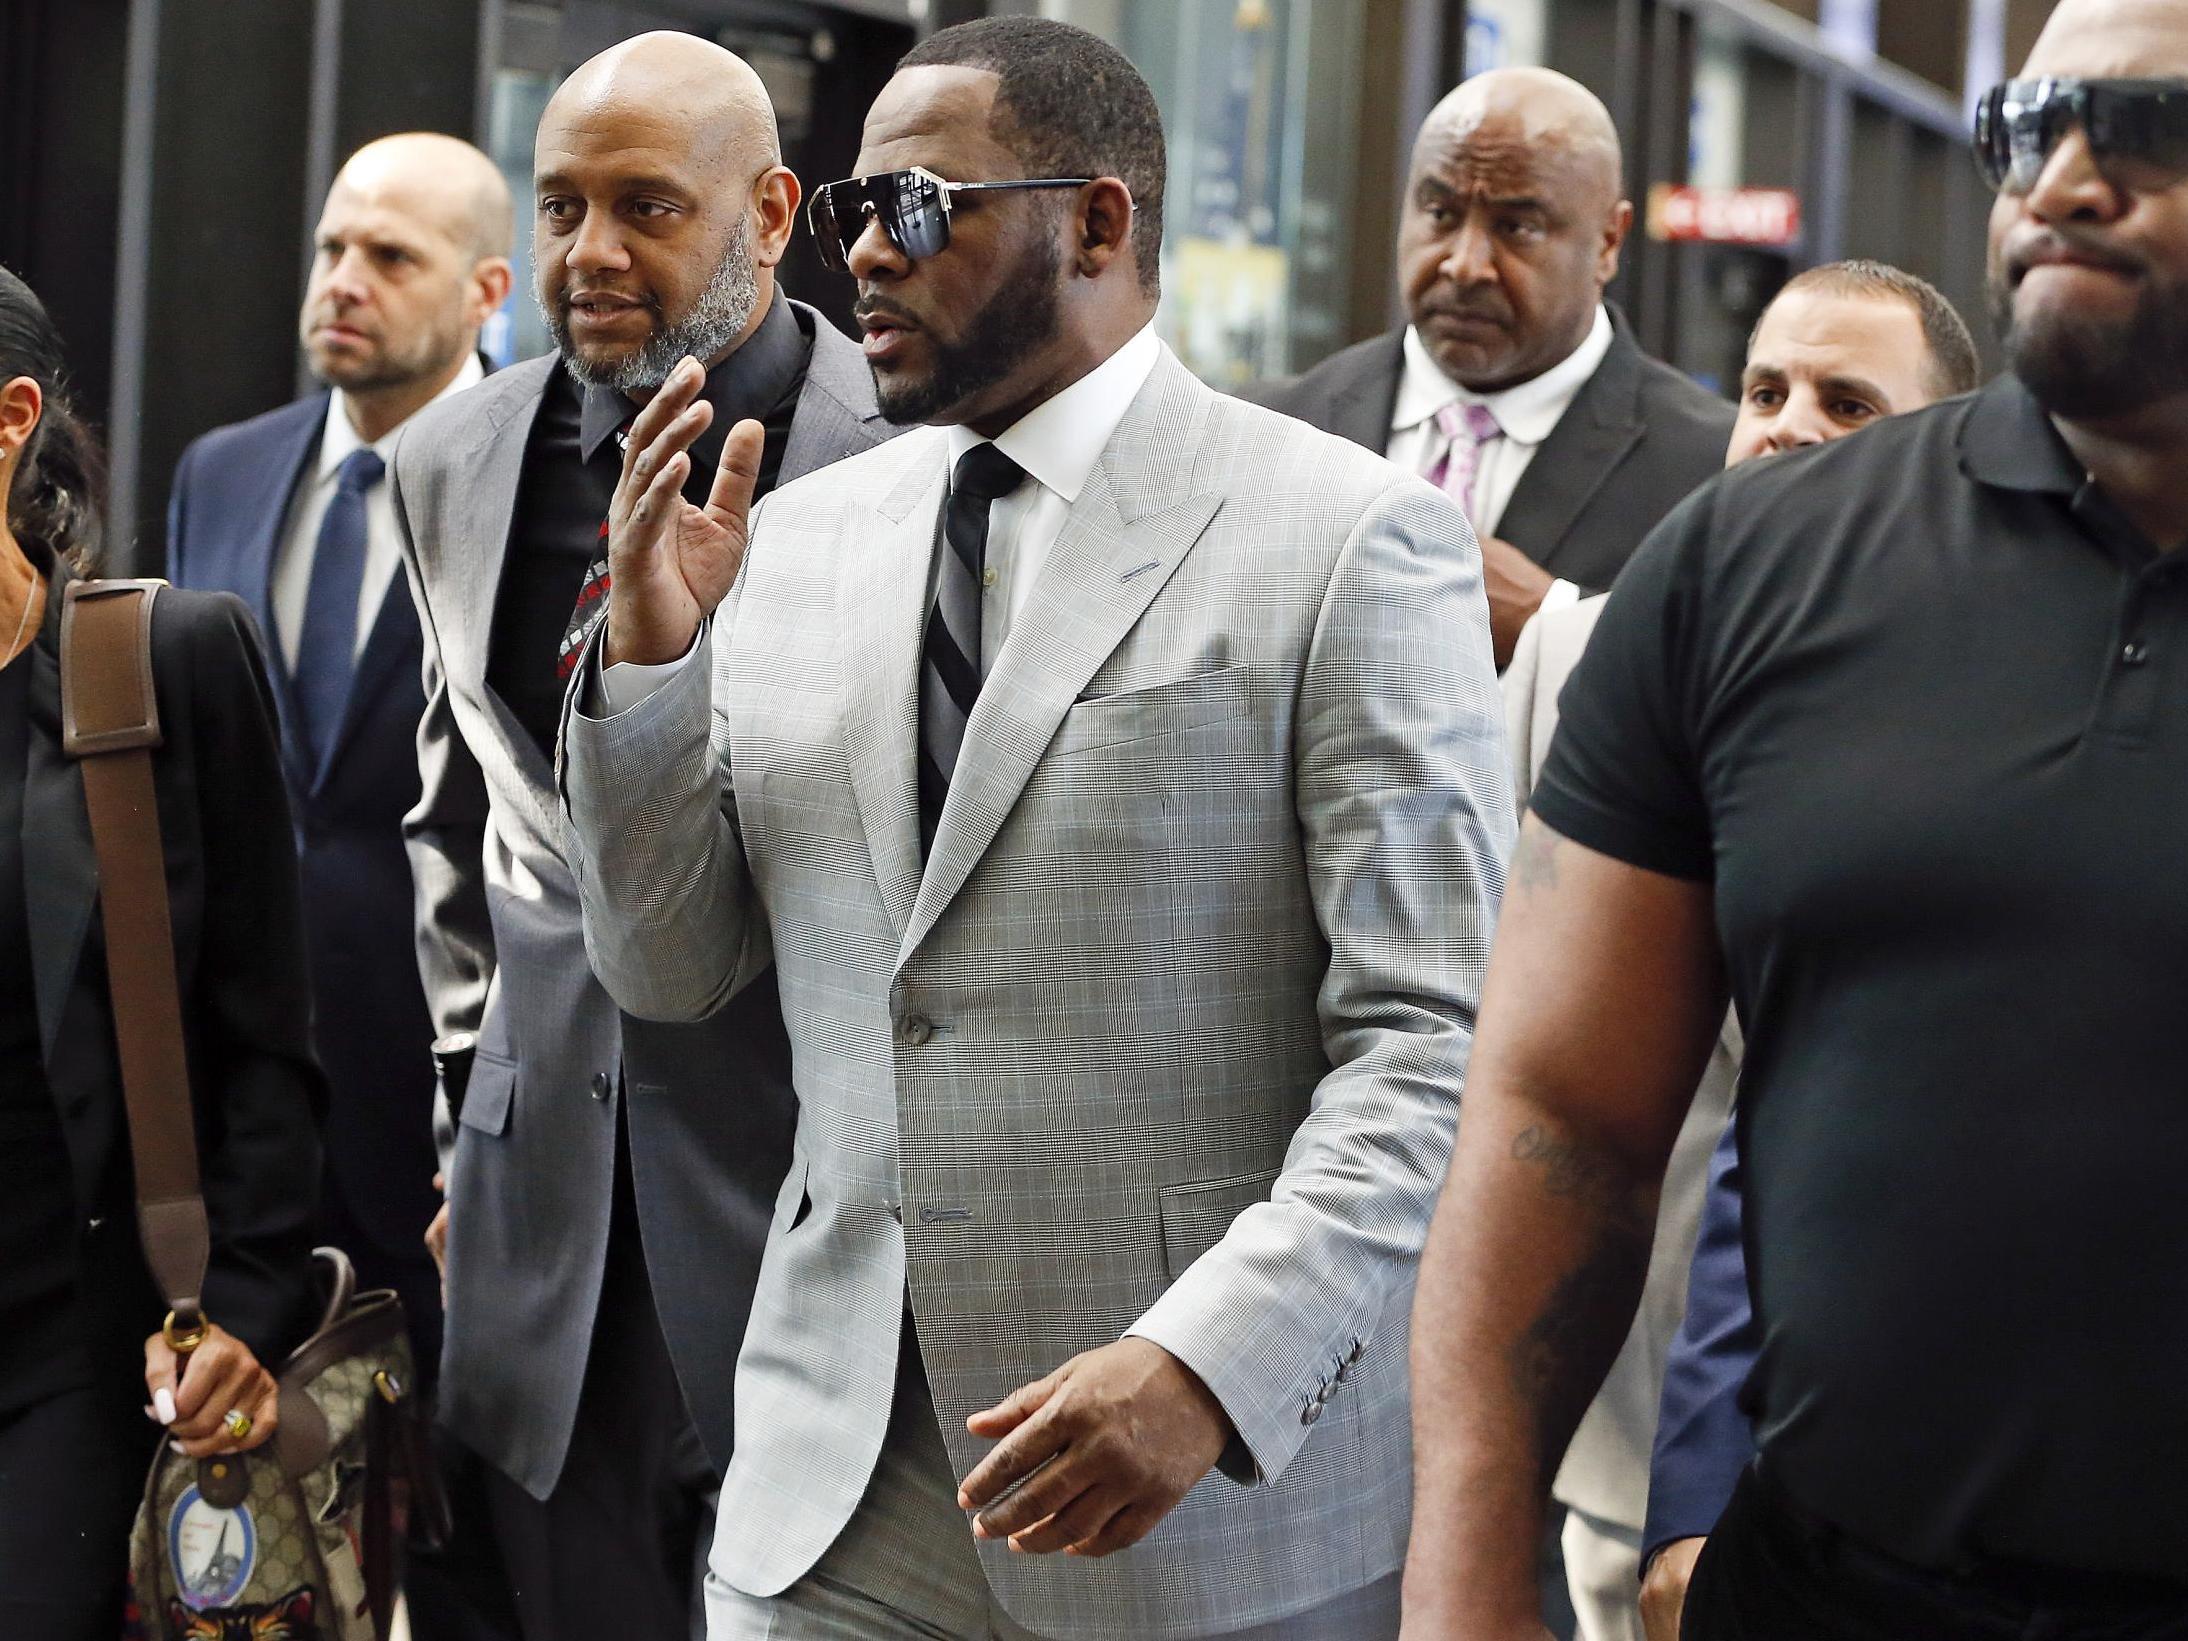 R Kelly arrives at the Leighton Criminal Courthouse on 6 June, 2019 in Chicago, Illinois.